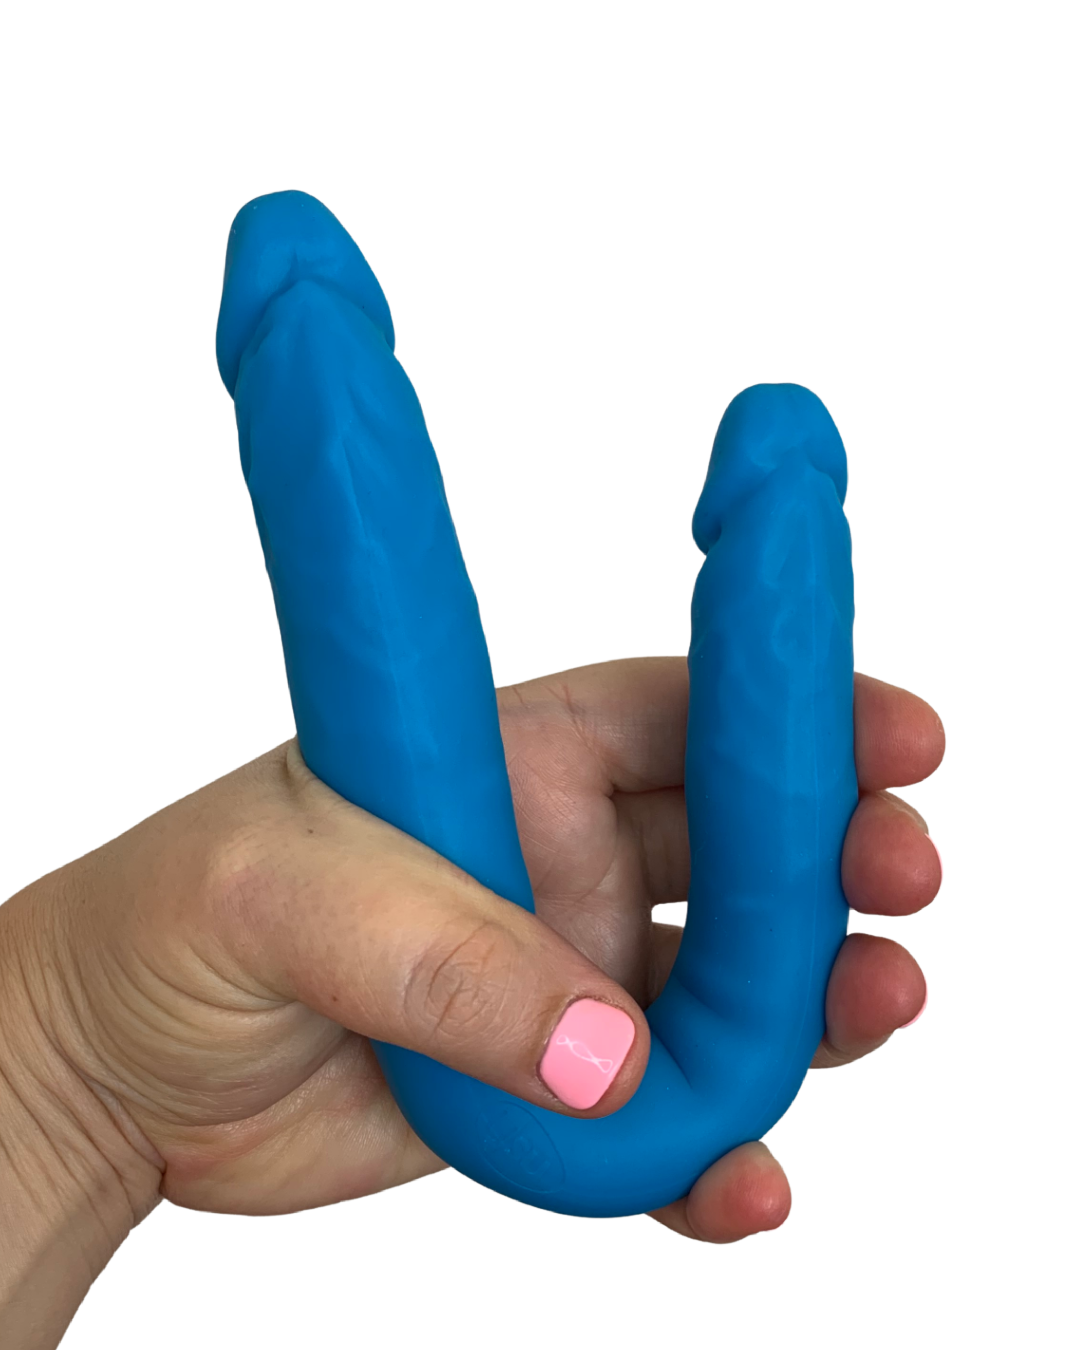 Colours 12 Inch Double Ended Dildo - Blue held in a hand in a U shape